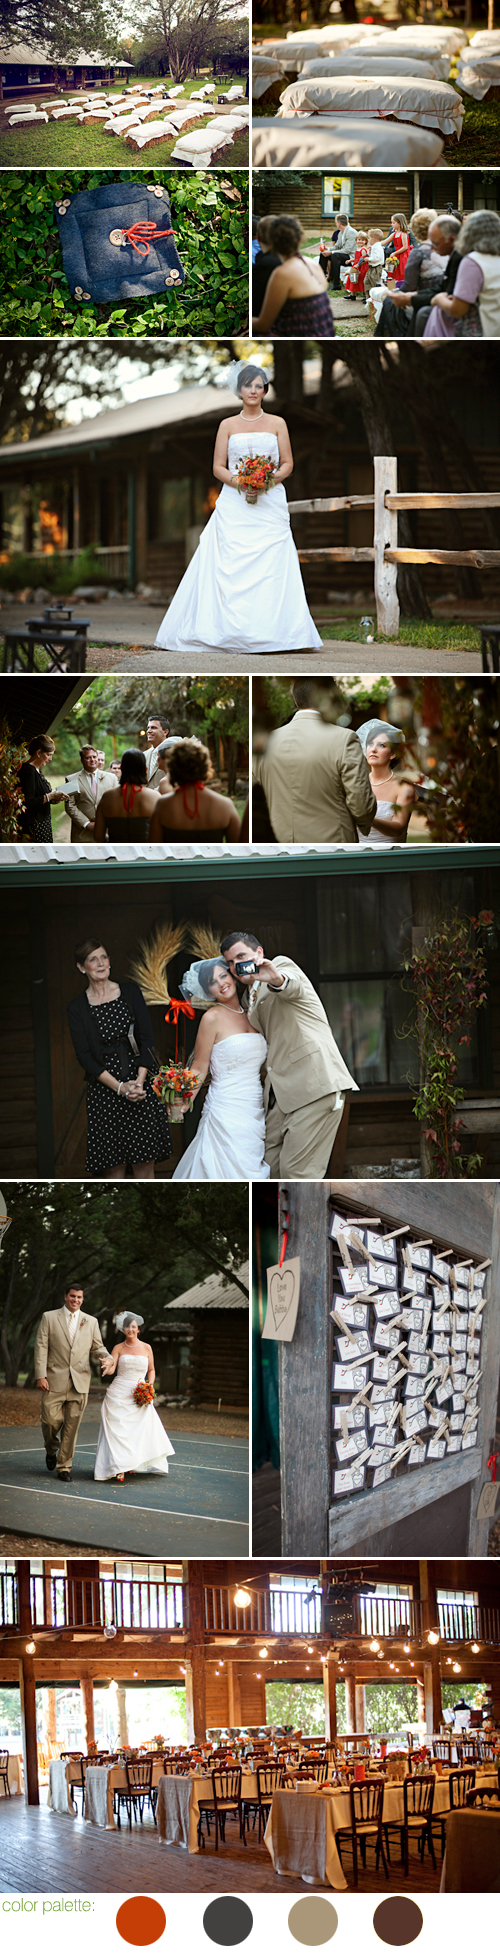 rustic texas wedding at the T Bar M Resort, wedding photos by ee Photography